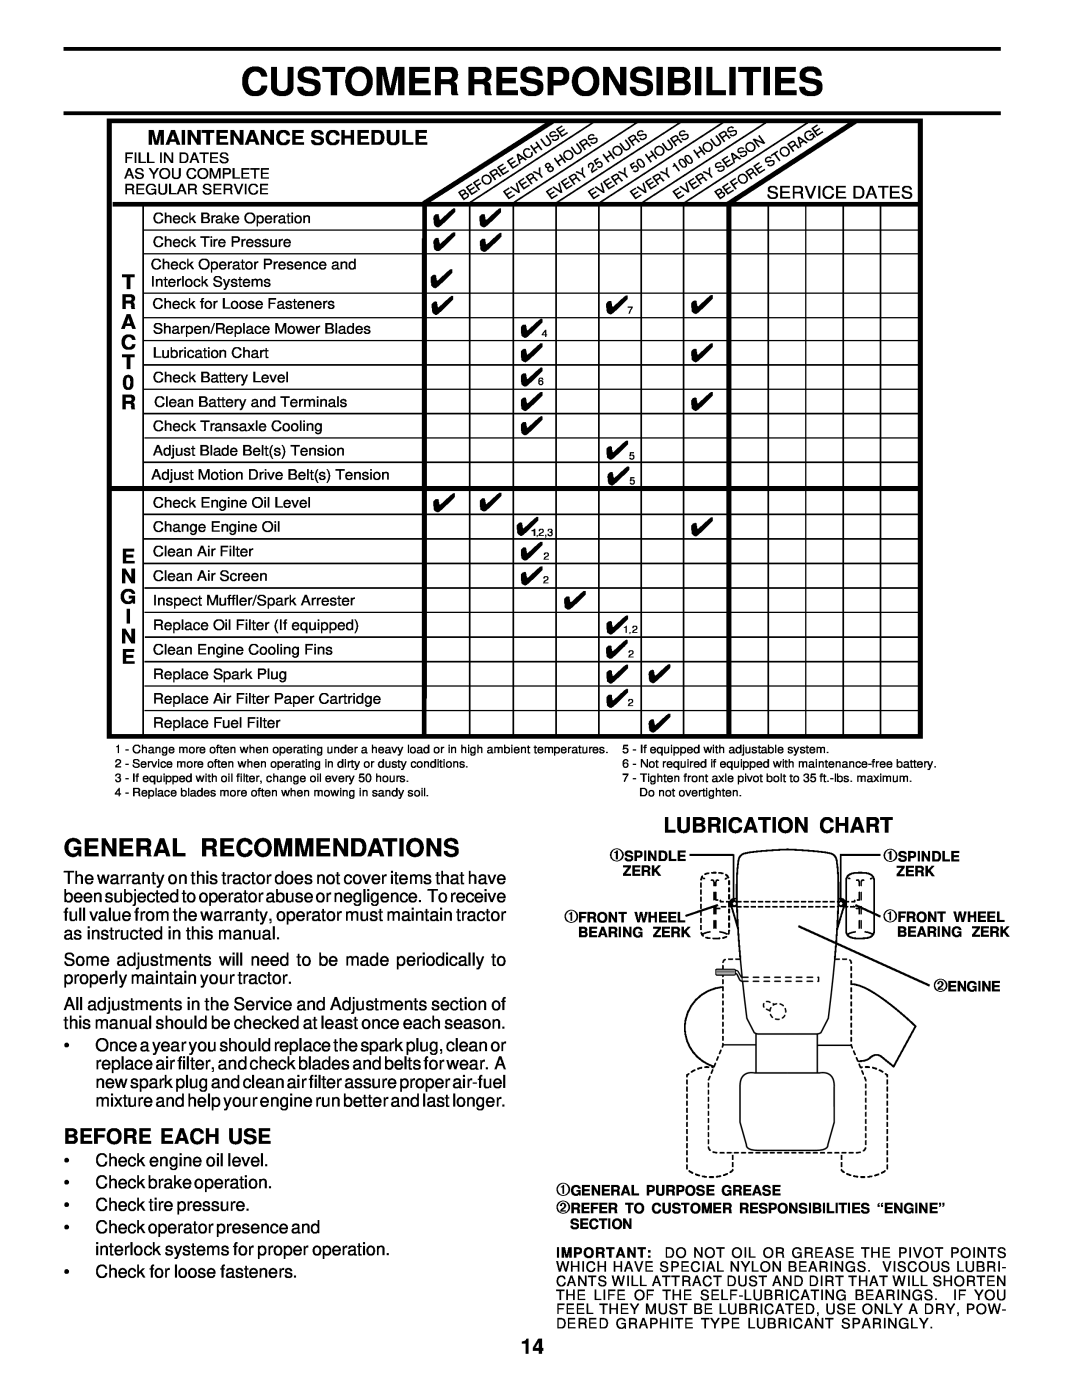 Weed Eater WE16542D owner manual Customer Responsibilities, General Recommendations, Before Each Use, Lubrication Chart 